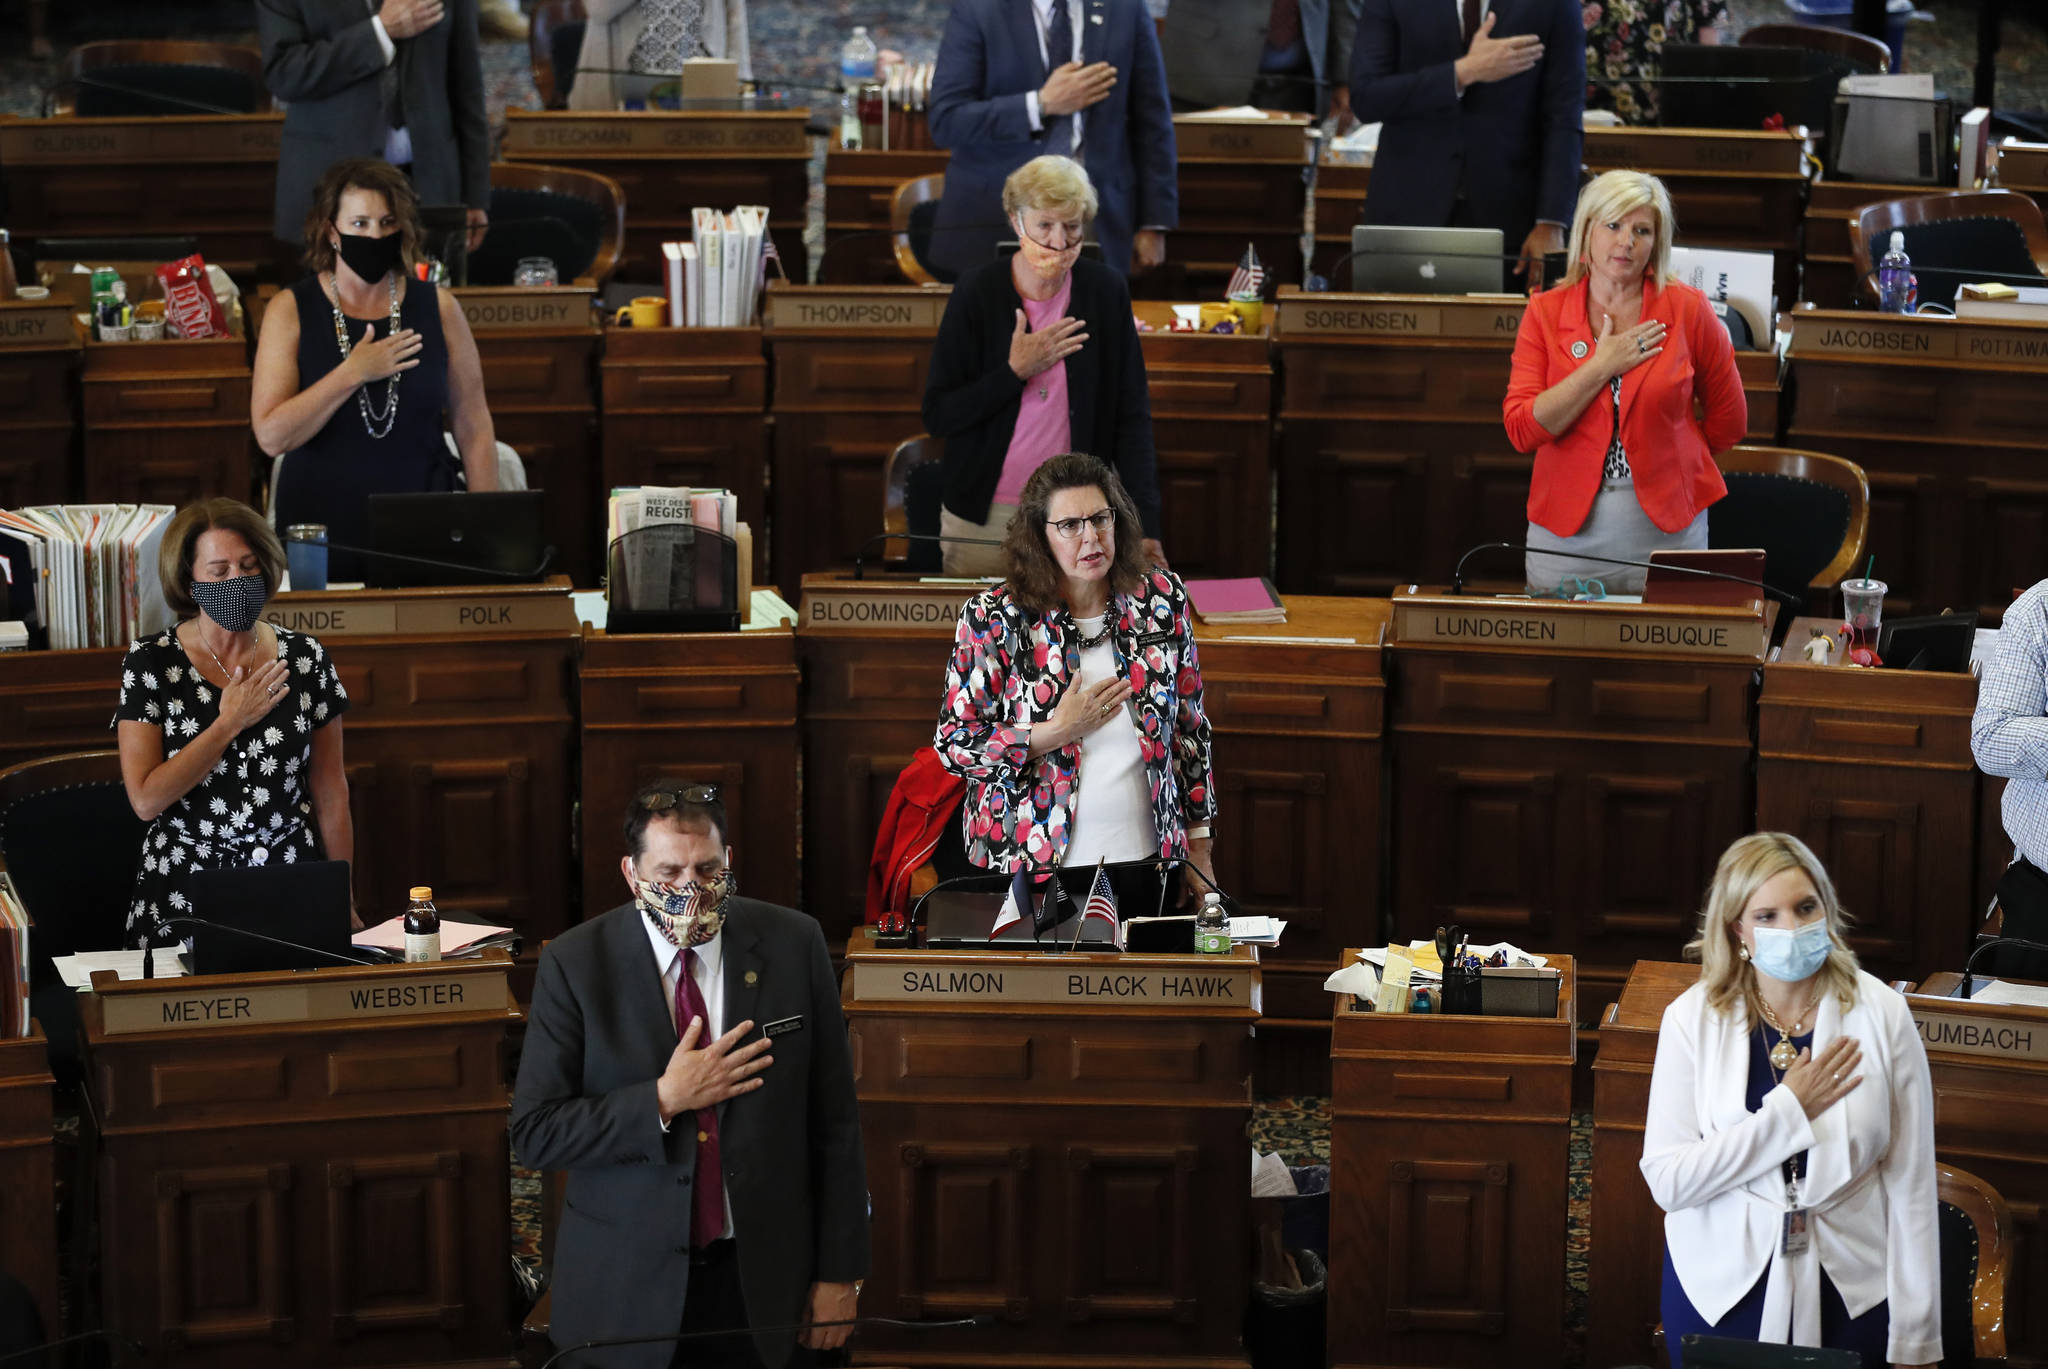 State Representatives stand at their desks during the Pledge of Allegiance in the Iowa House chambers, at the Statehouse in Des Moines, Iowa, in June 2020. As states brace for a coronavirus surge following holiday gatherings, one place stands out as a potential super-spreader site, the statehouses where lawmakers will help shape the response to the pandemic. (AP Photo / Charlie Neibergall)